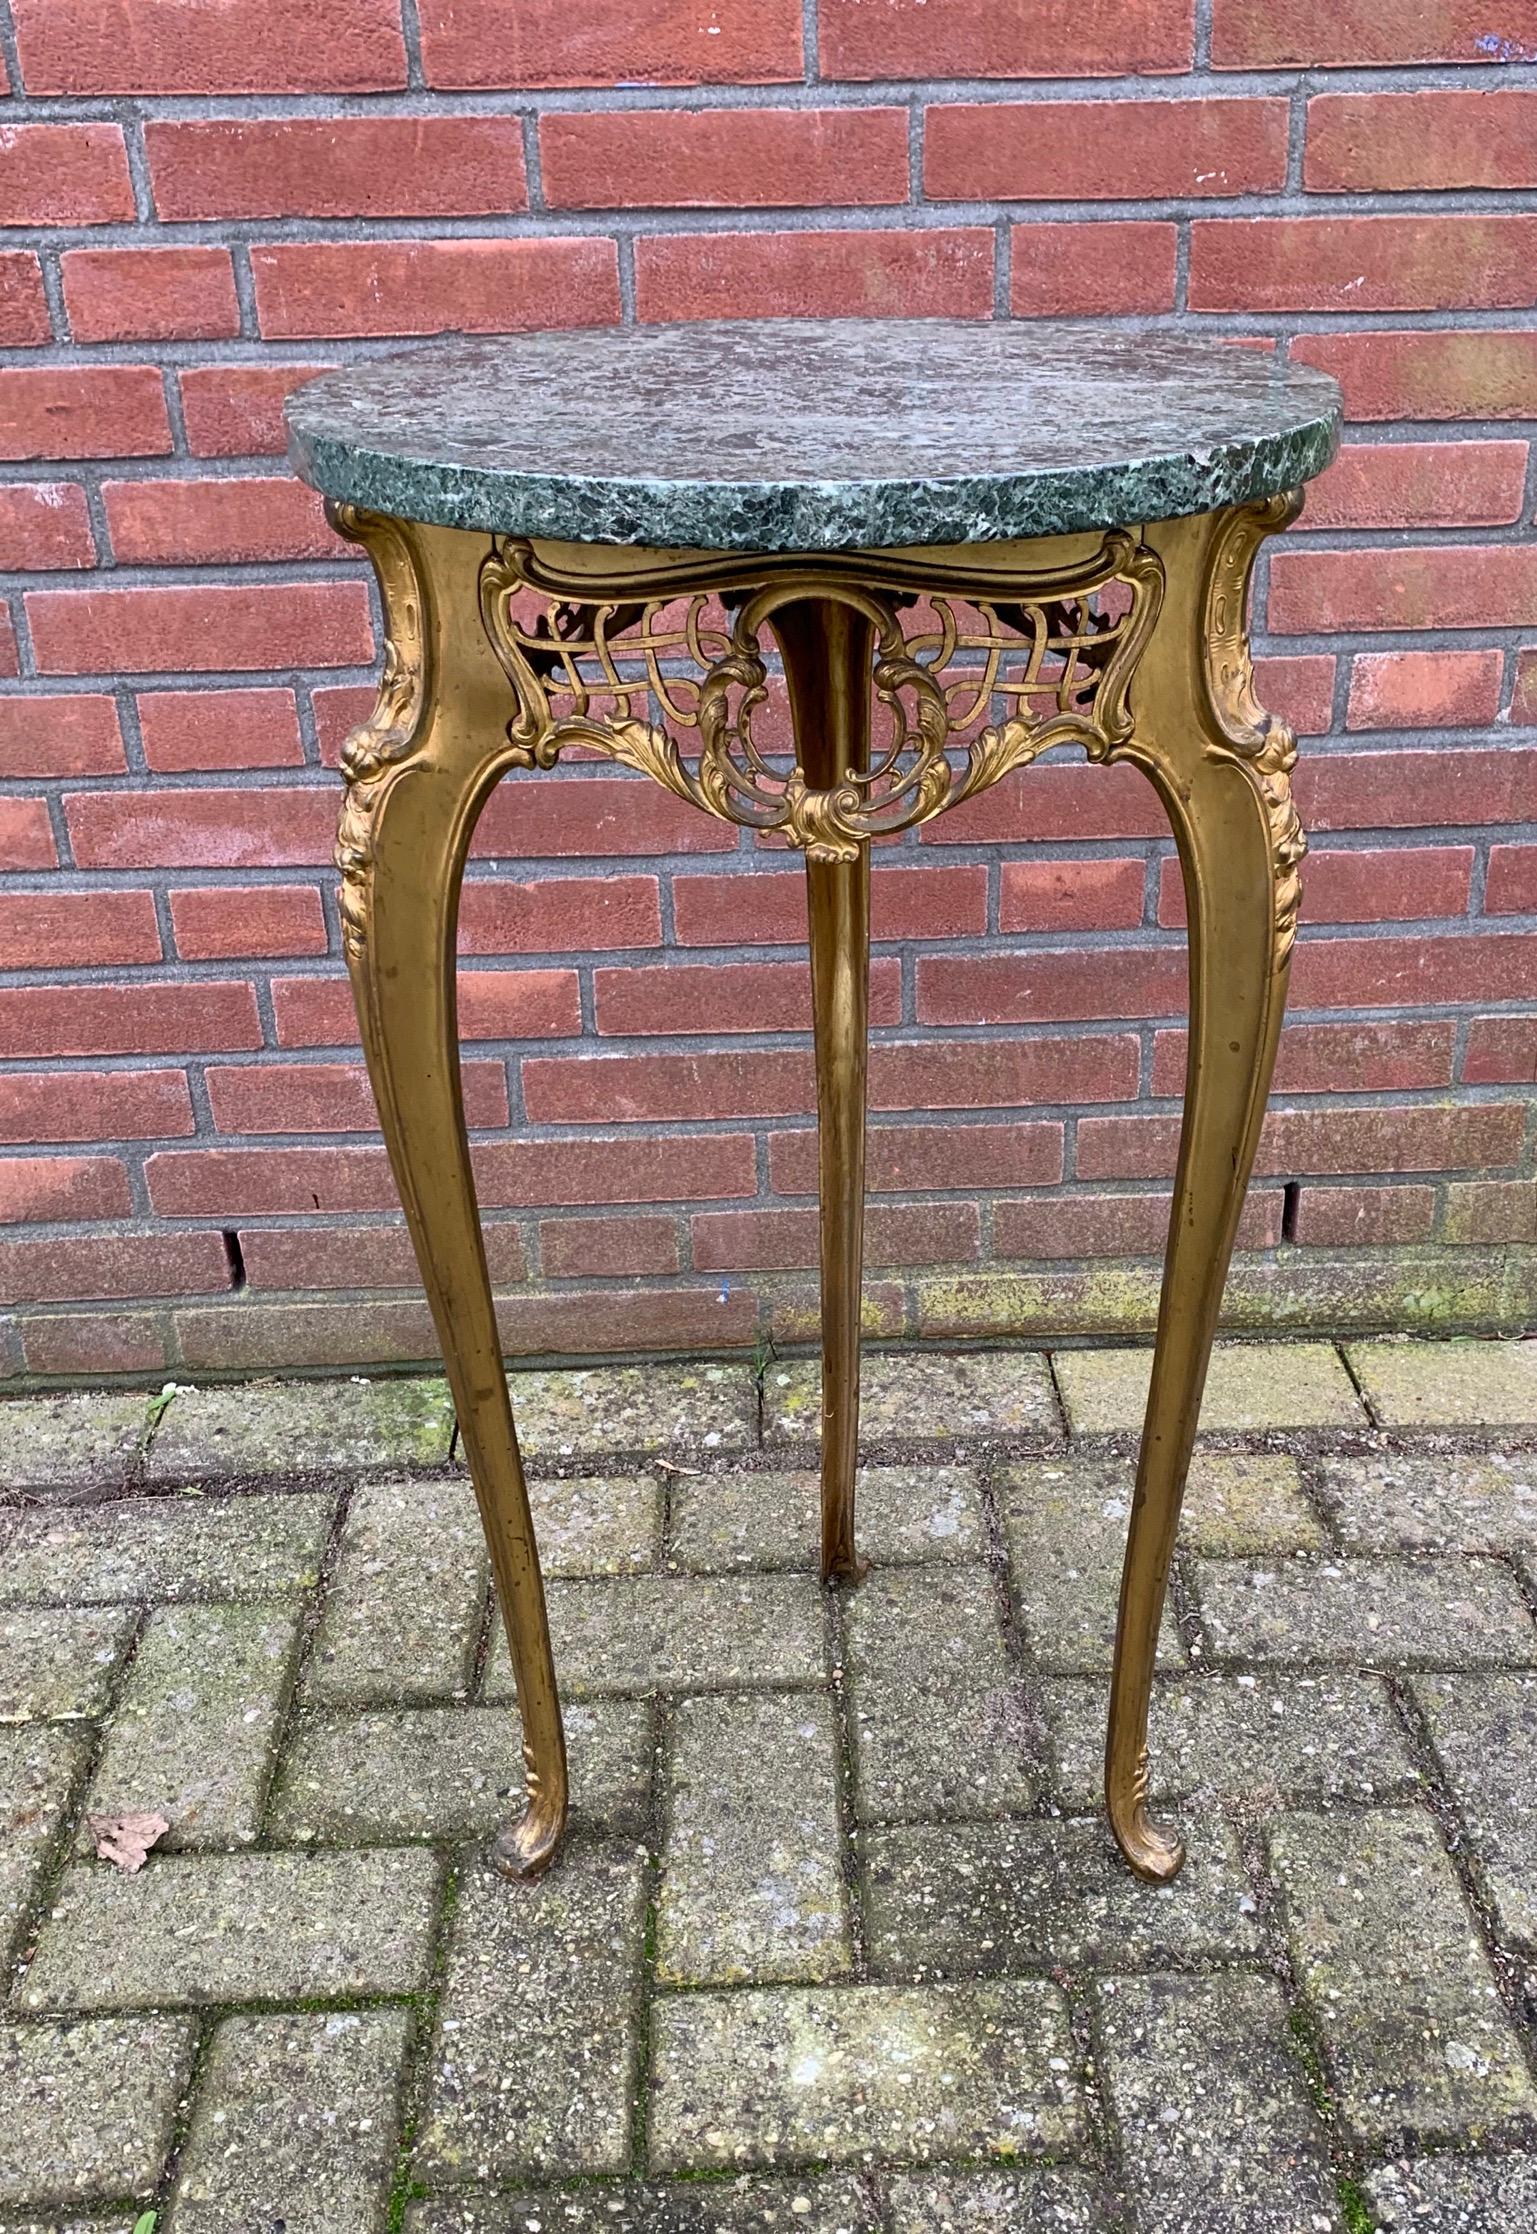 Unique and impressive, finest quality and gilt bronze table.

If you are looking for a remarkable antique table to grace your living space then this highly stylish specimen could be flying your way soon. All handcrafted out of expensive materials